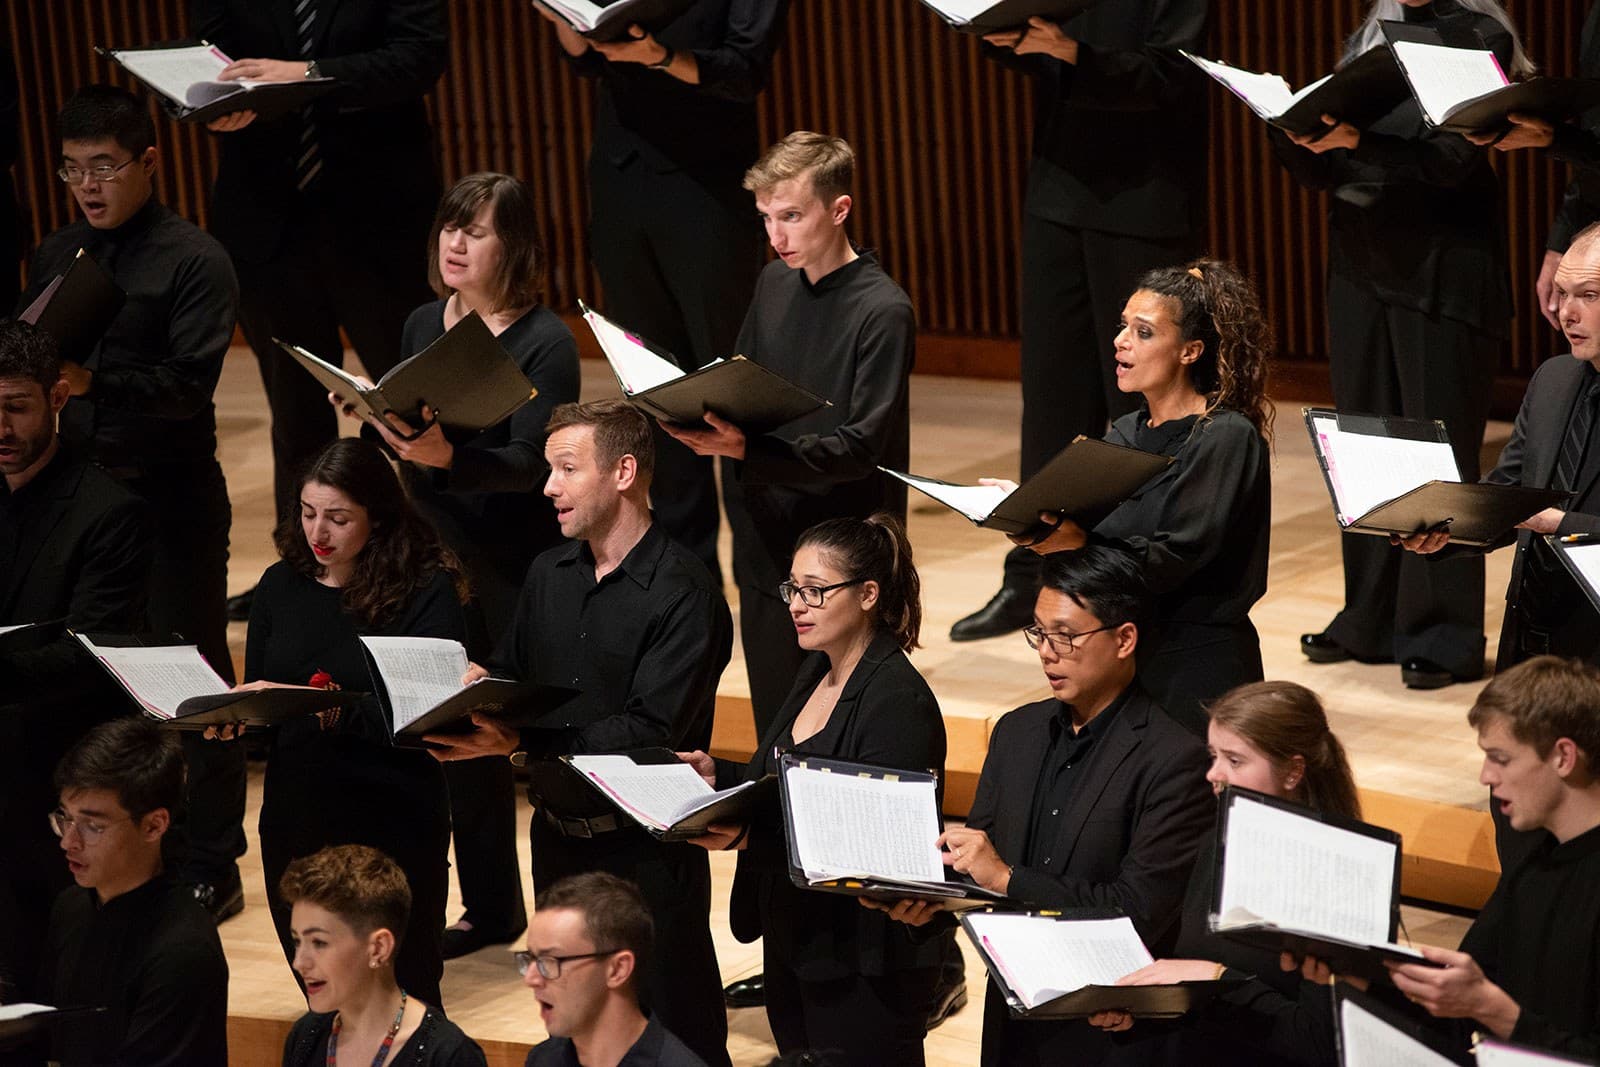 Choir members wearing black outfits hold folders as they perform on stage.